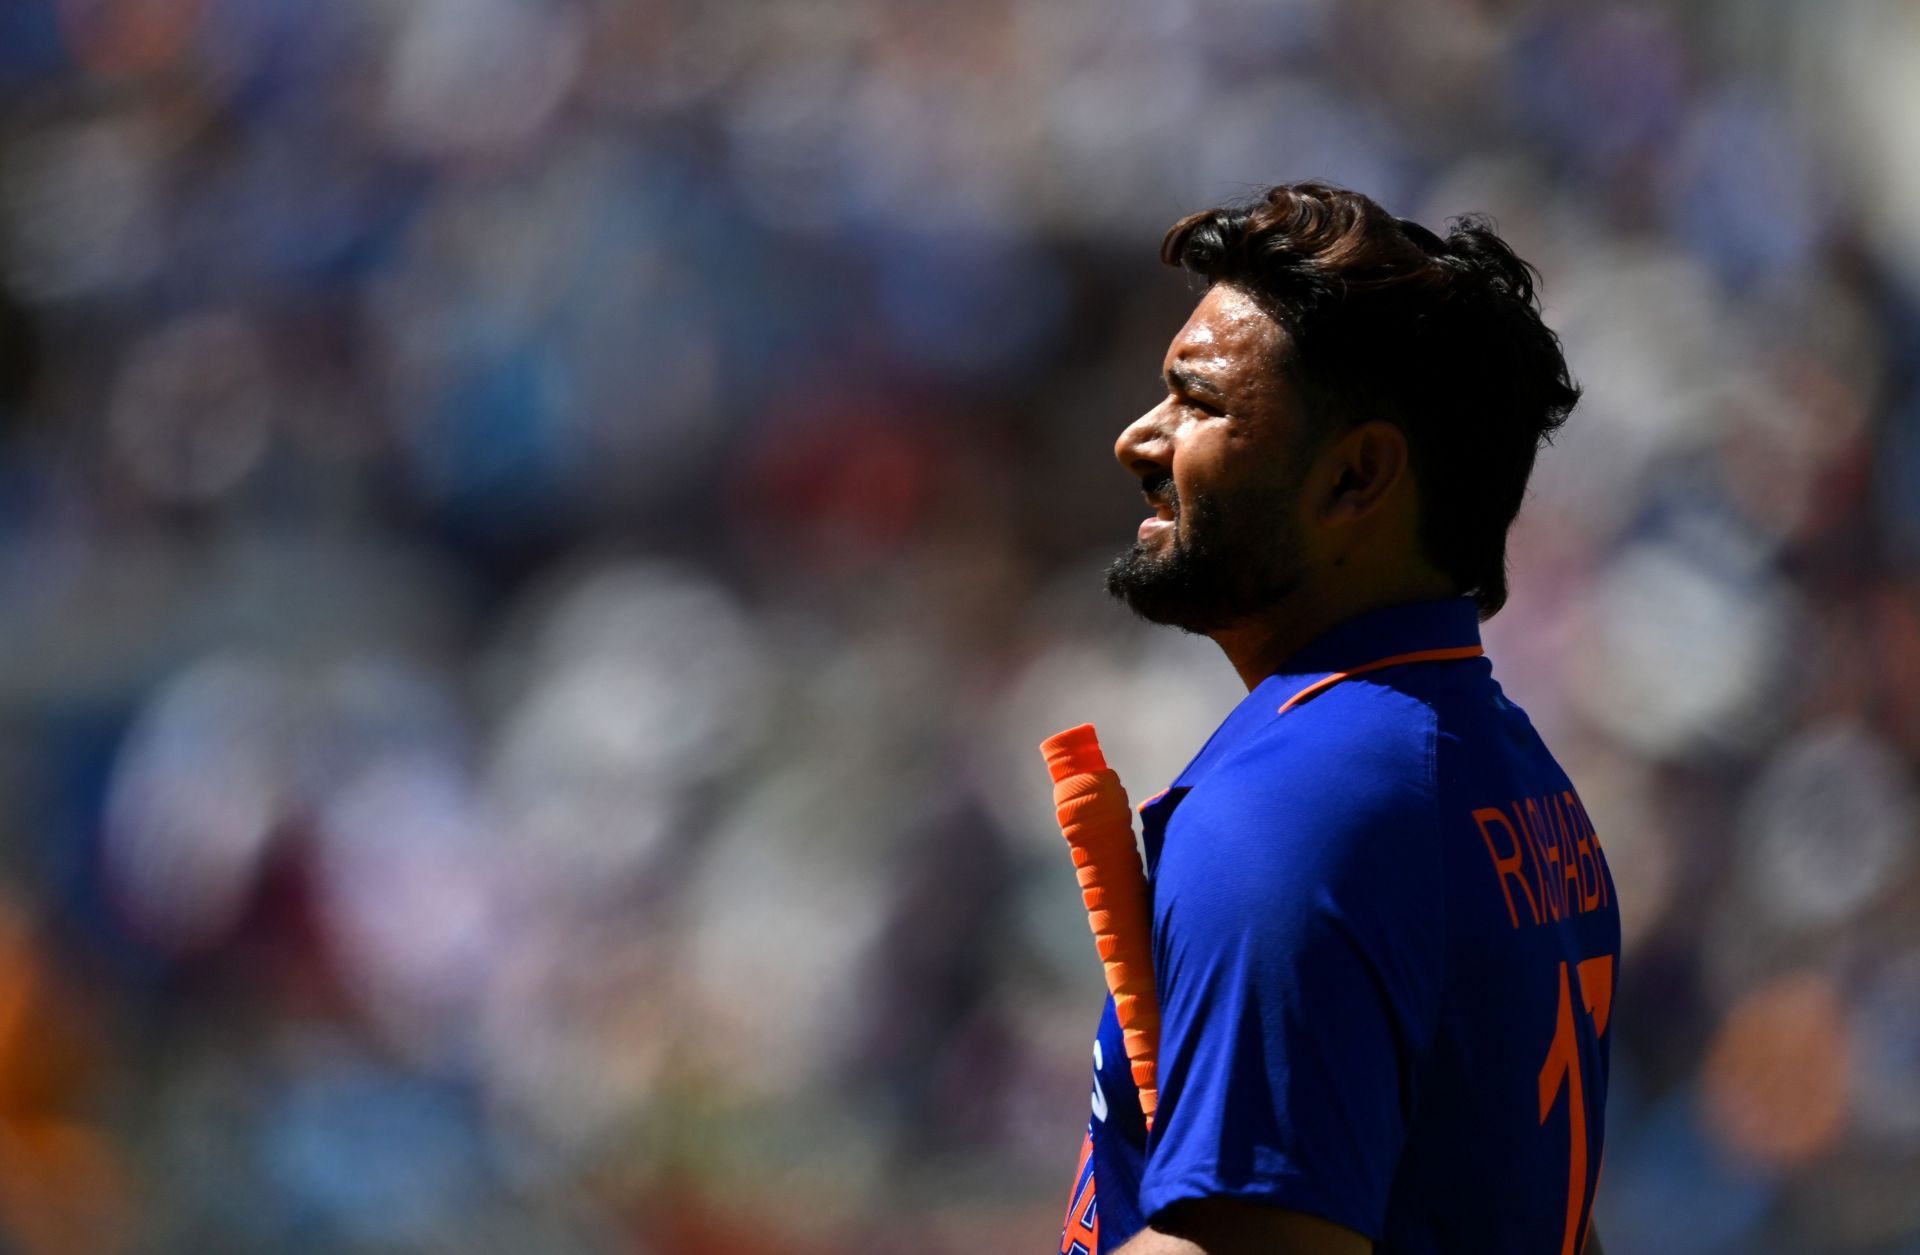 Pant is likely to play as an opener in 1st T20I vs West Indies.